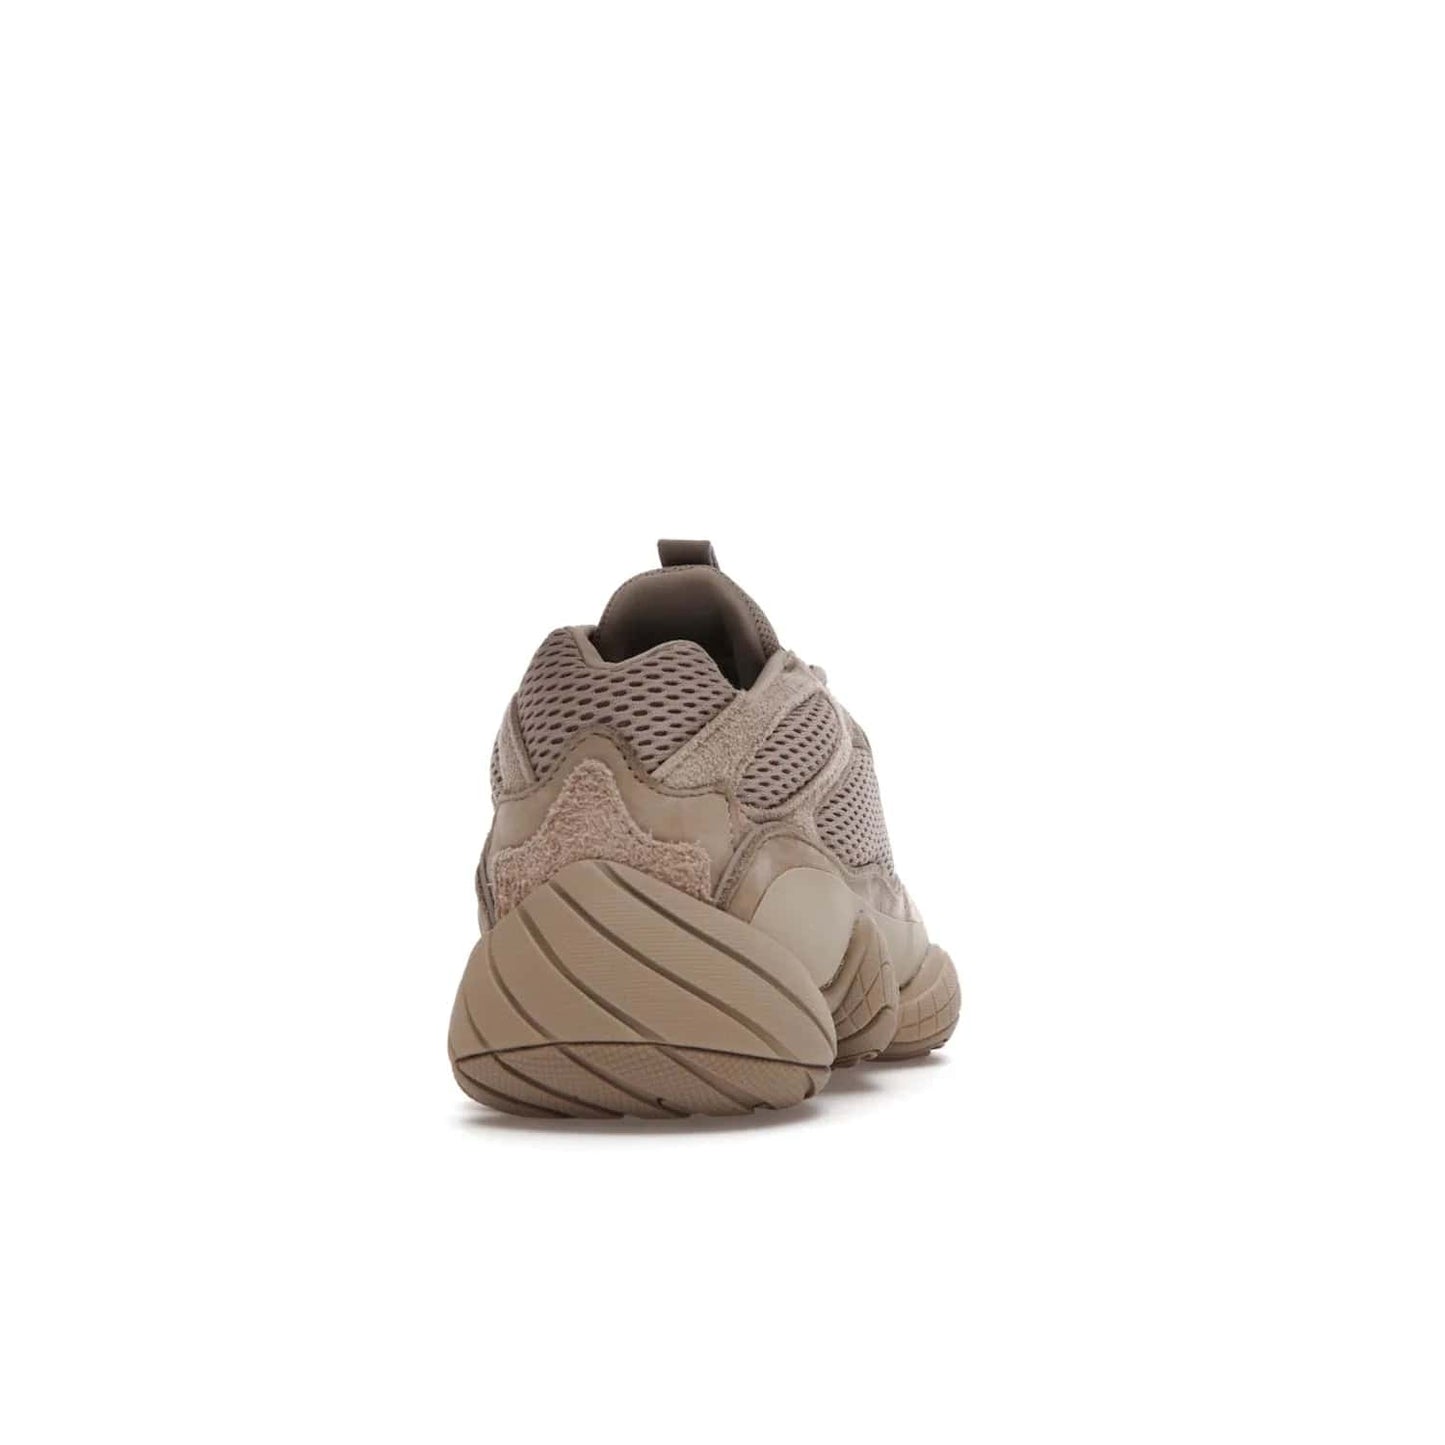 adidas Yeezy 500 Taupe Light - Image 29 - Only at www.BallersClubKickz.com - The adidas Yeezy 500 Taupe Light combines mesh, leather, and suede, with a durable adiPRENE sole for an eye-catching accessory. Reflective piping adds the perfect finishing touches to this unique silhouette. Ideal for any wardrobe, releasing in June 2021.